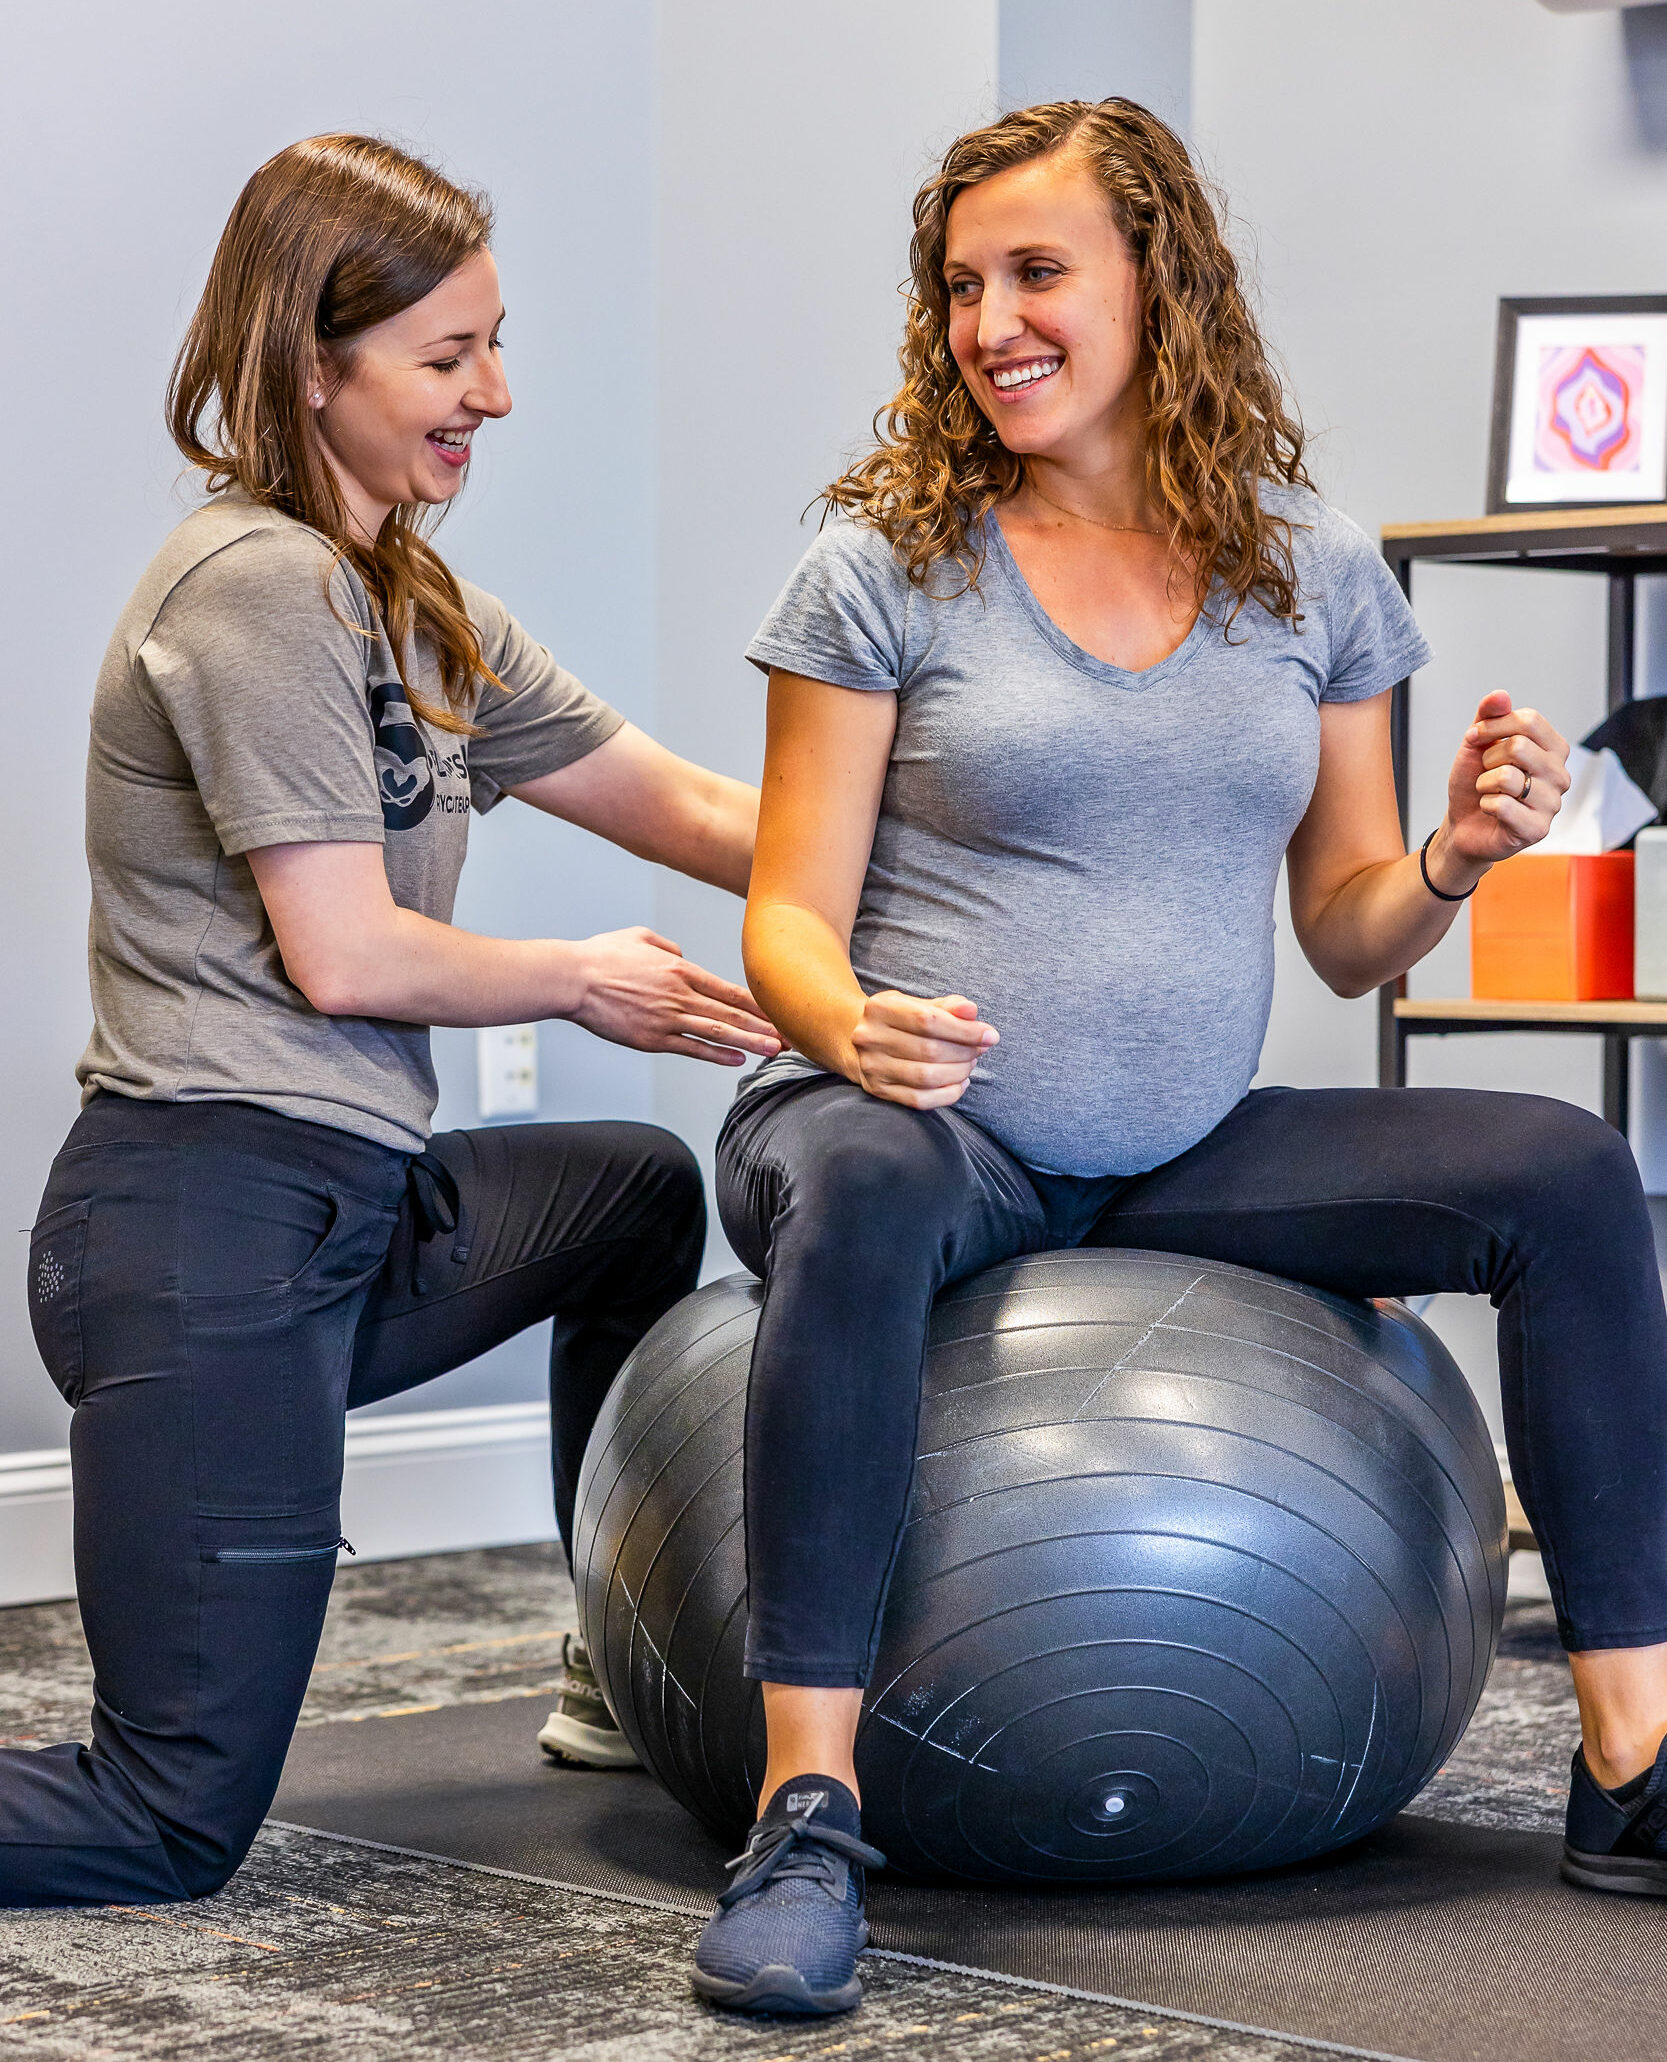 pregnant woman sitting on exercise ball with trainer